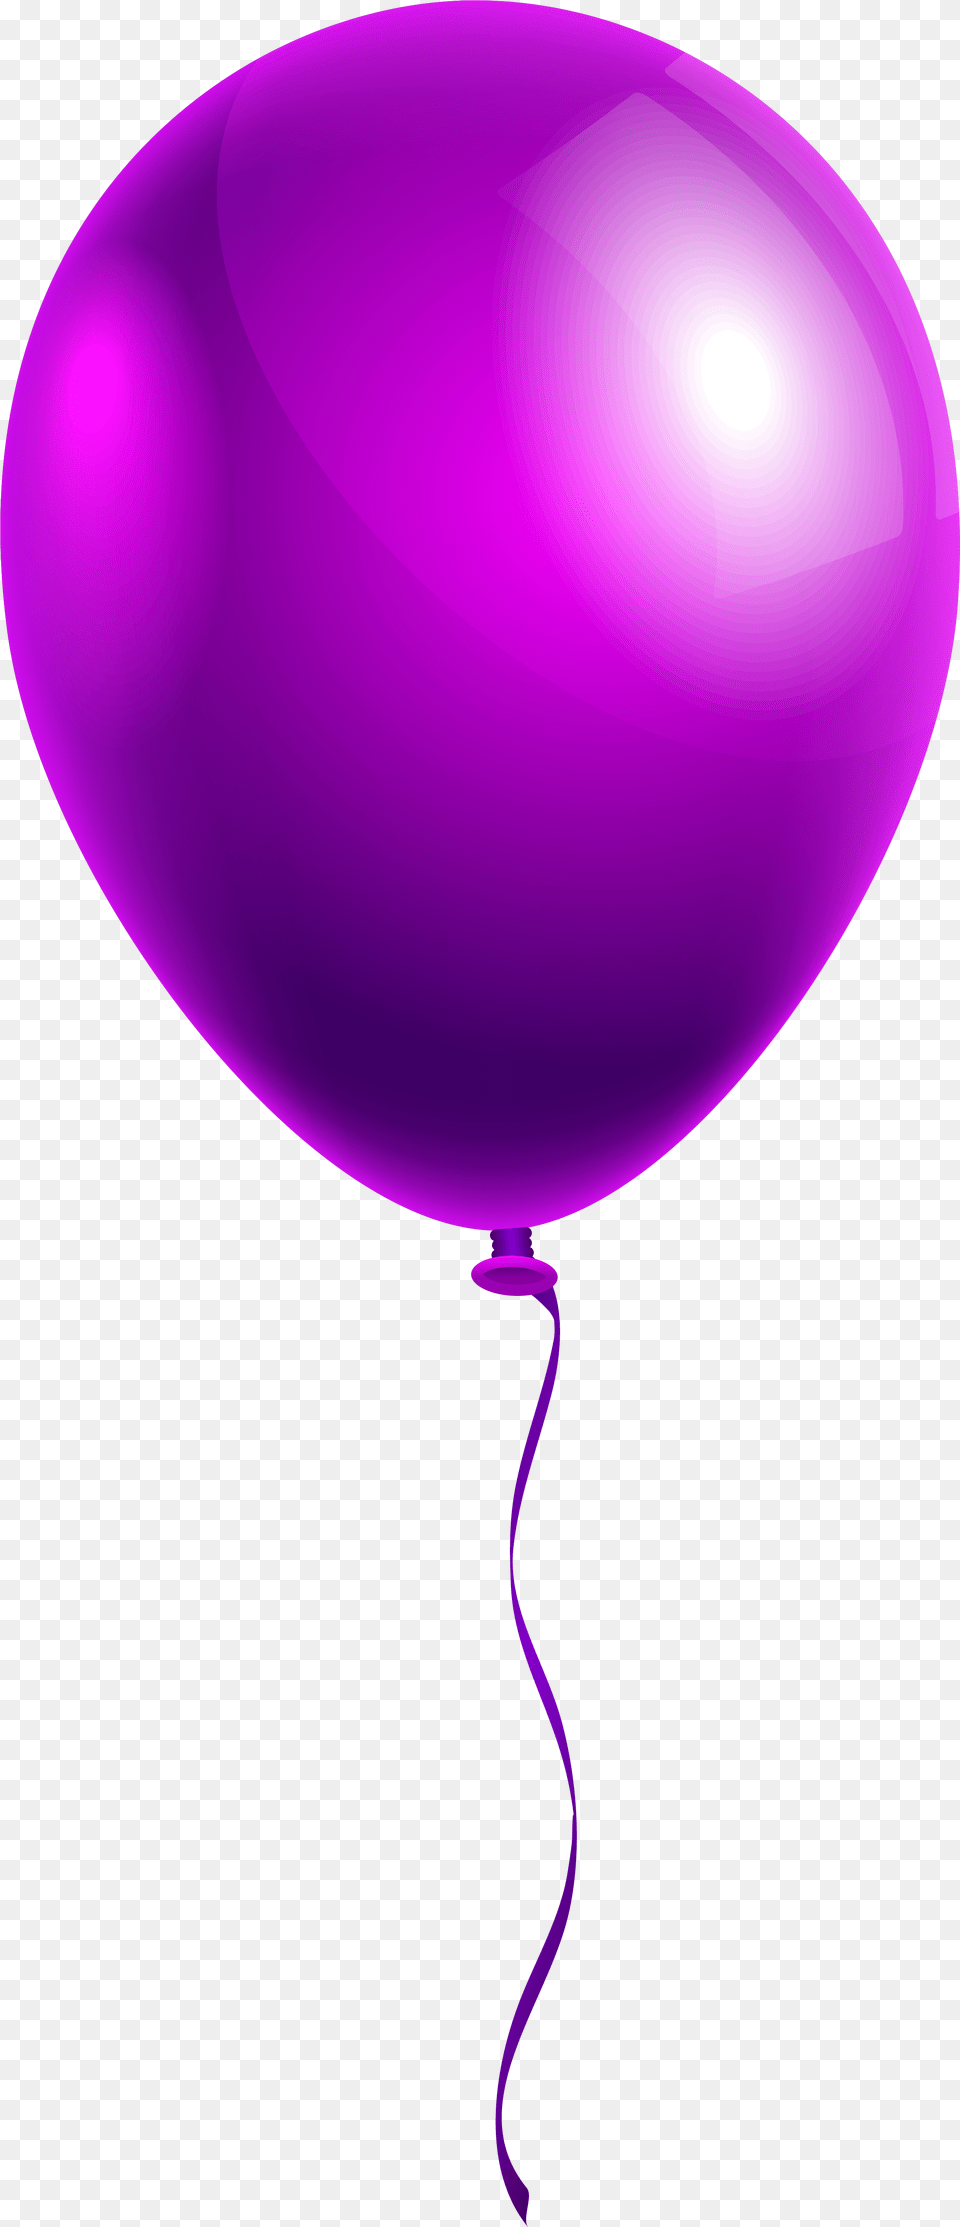 Blue Balloon Transparent Background Purple Balloon Free Png